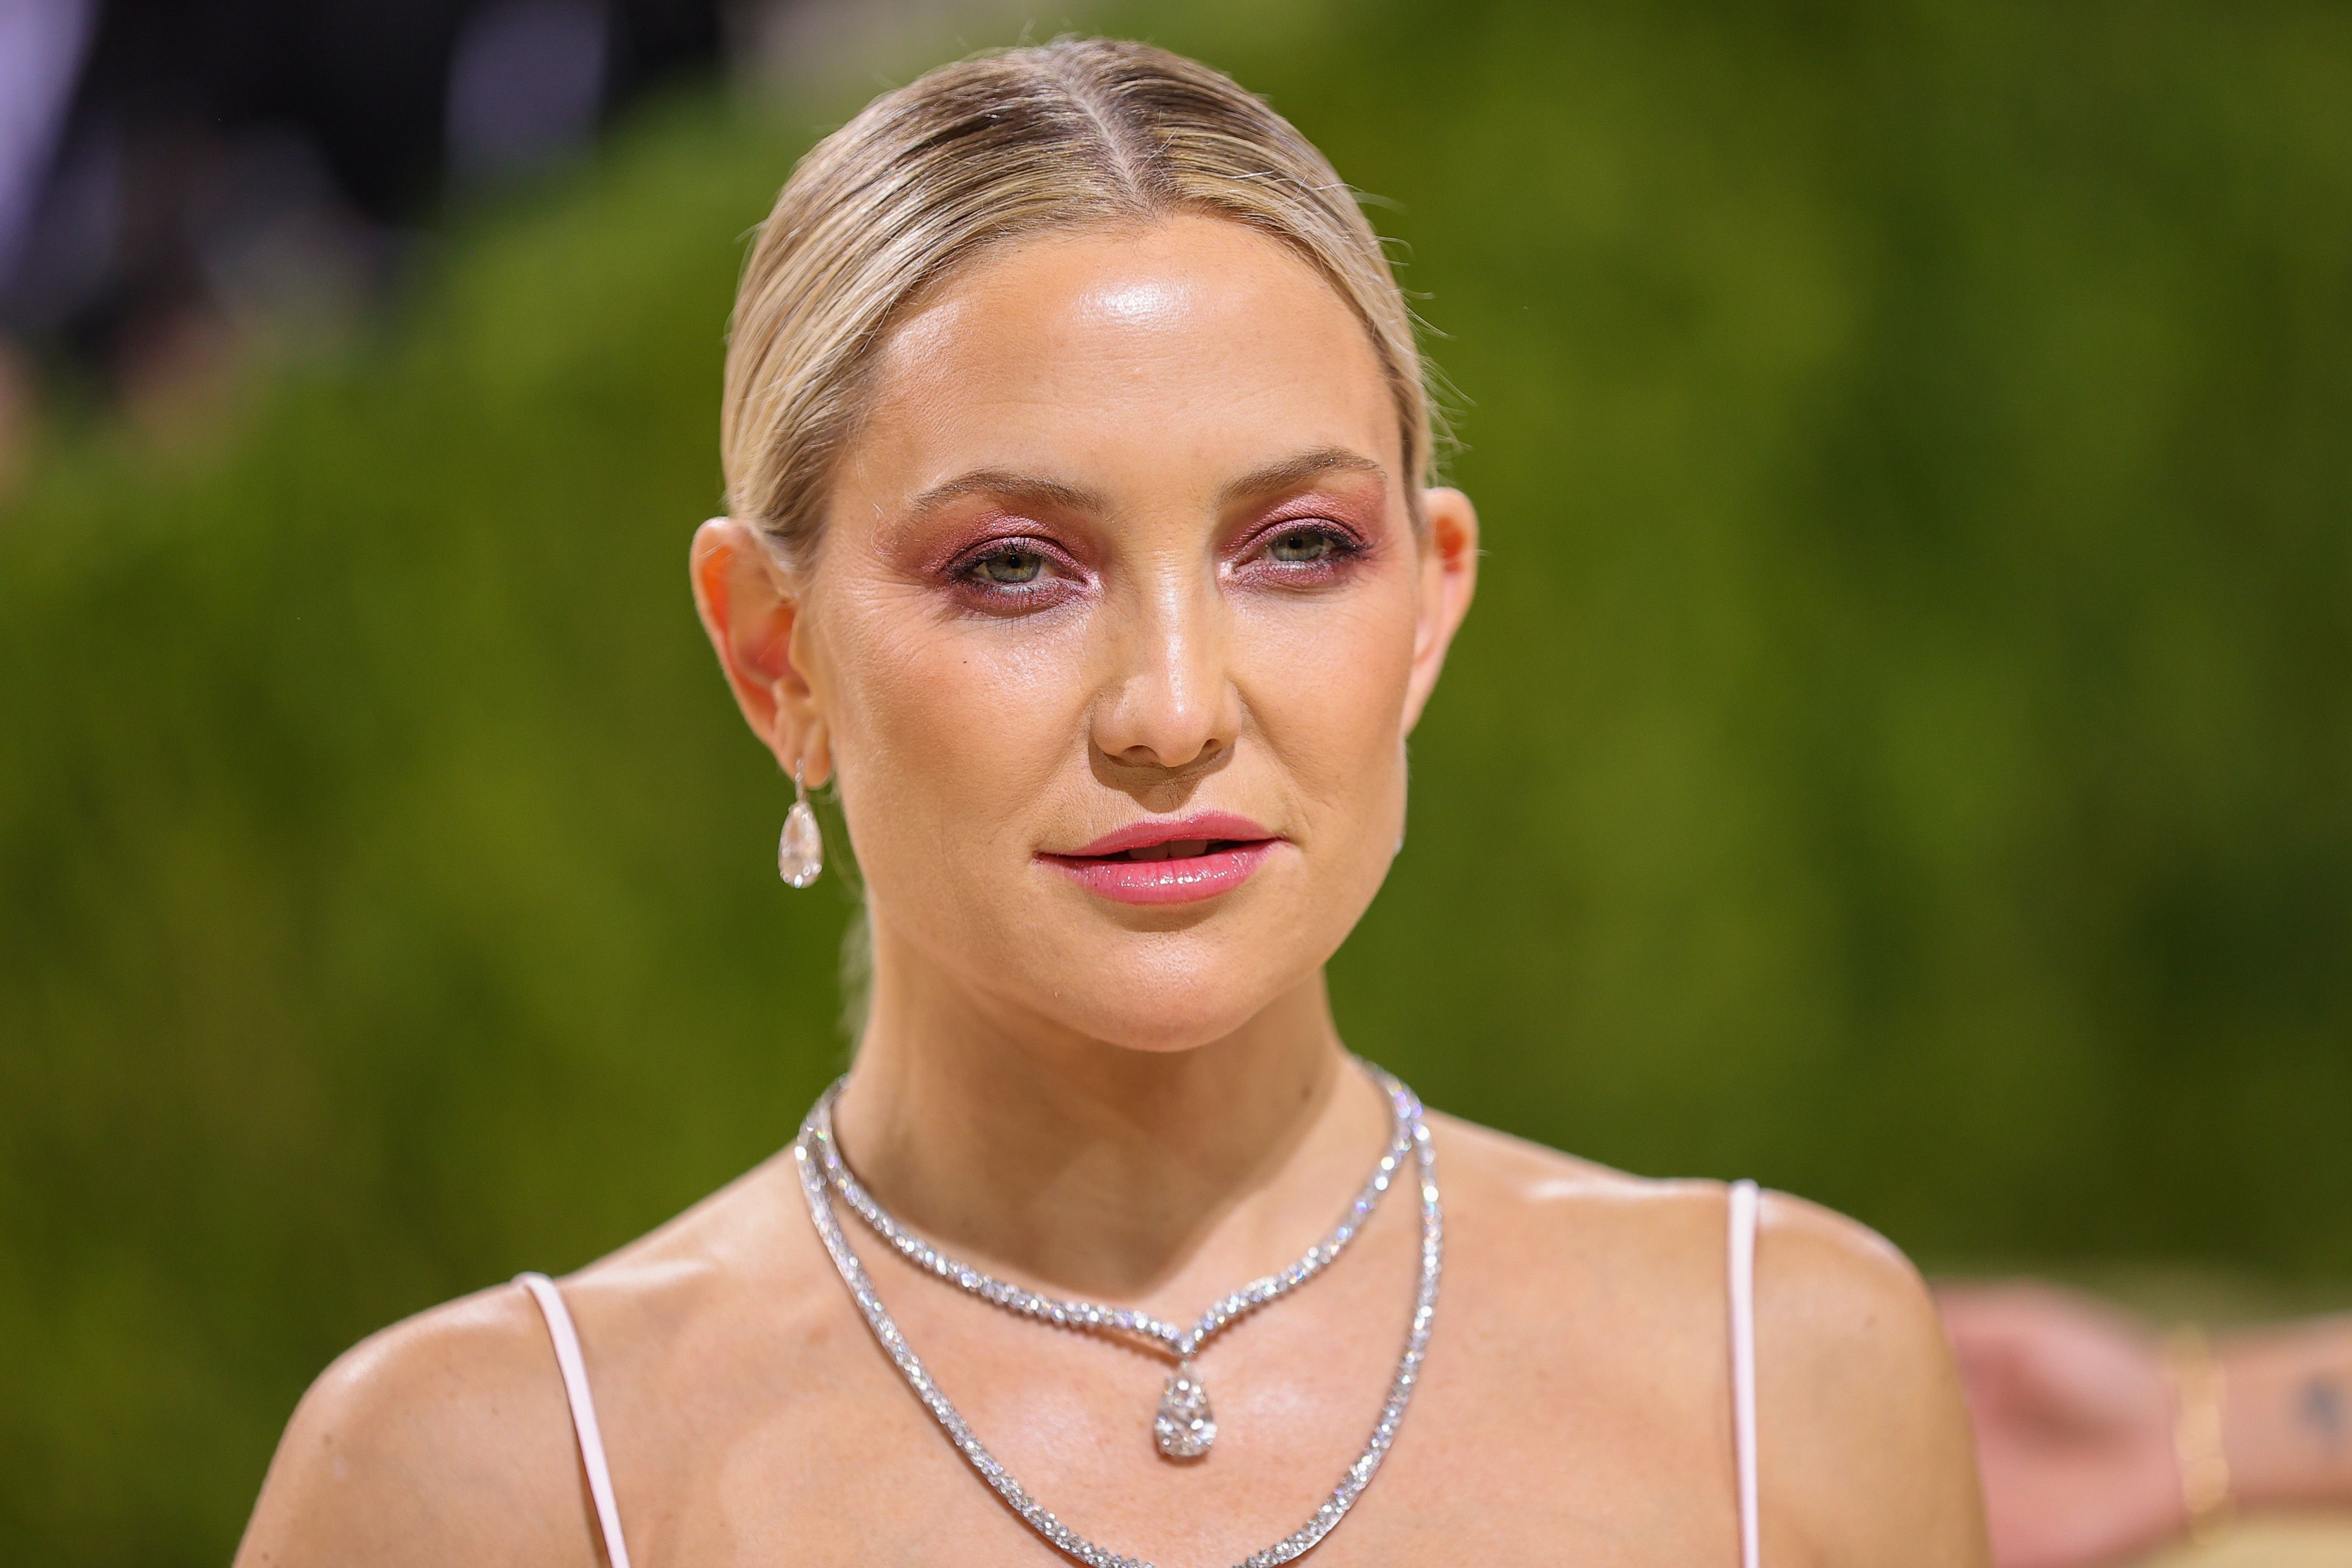 Kate Hudson Shares Her ‘Crazy Delicious’ Mocha Smoothie Recipe That's Full of Nutritious Ingredients